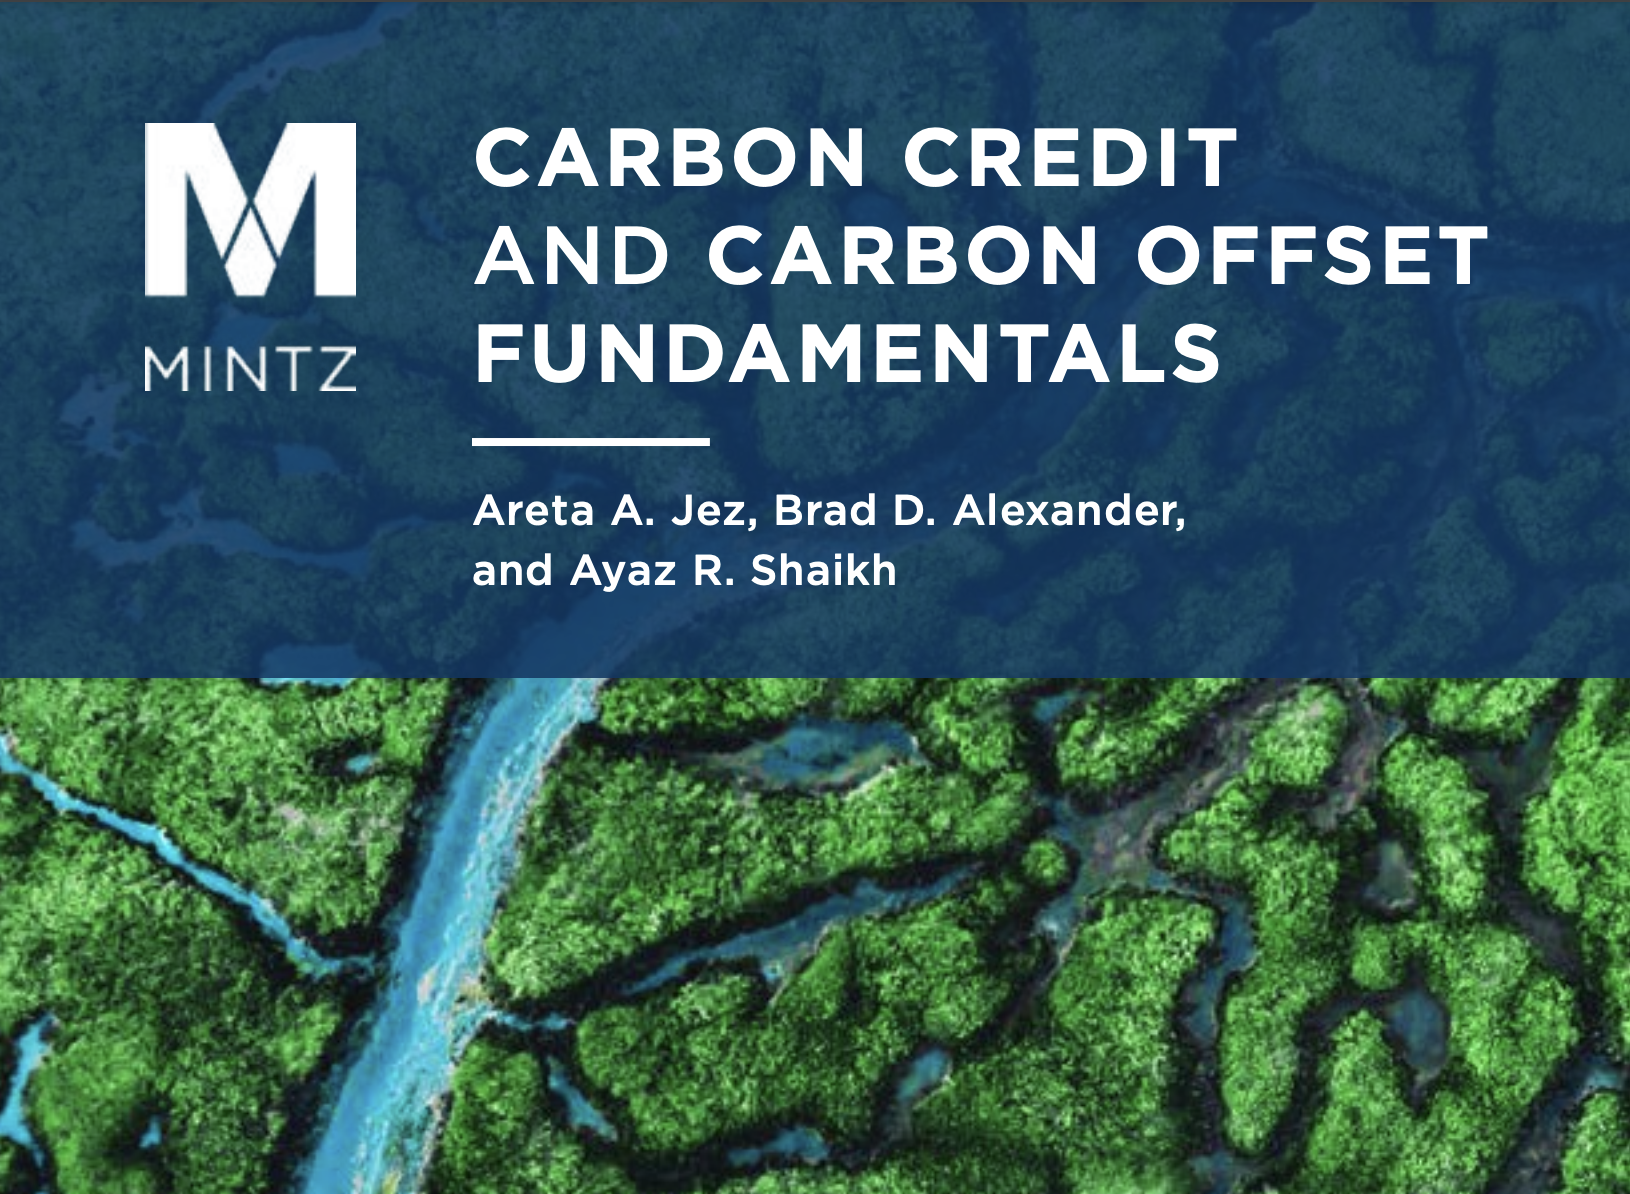 Carbon Credit and Carbon Offset Fundamentals White Paper Cover